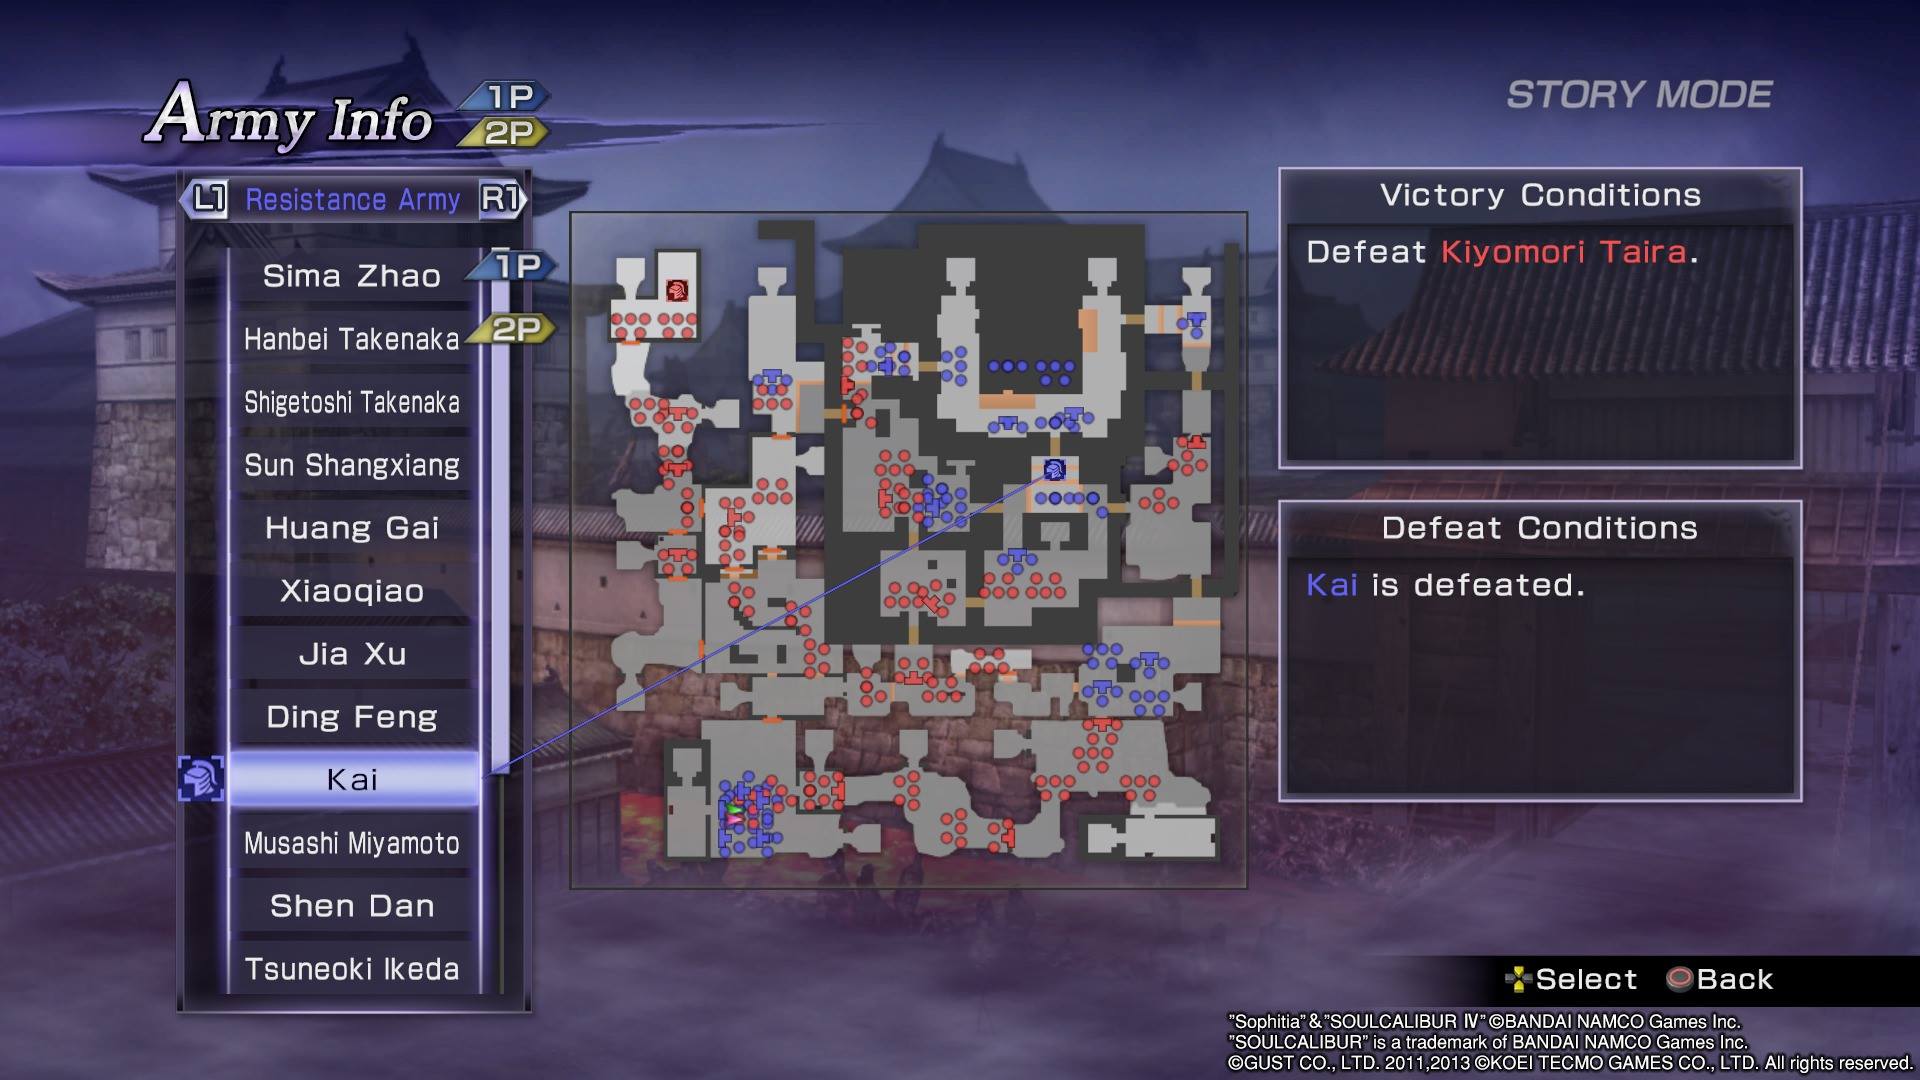 Warriors Orochi 3 Ultimate Battle Overview and Conditions